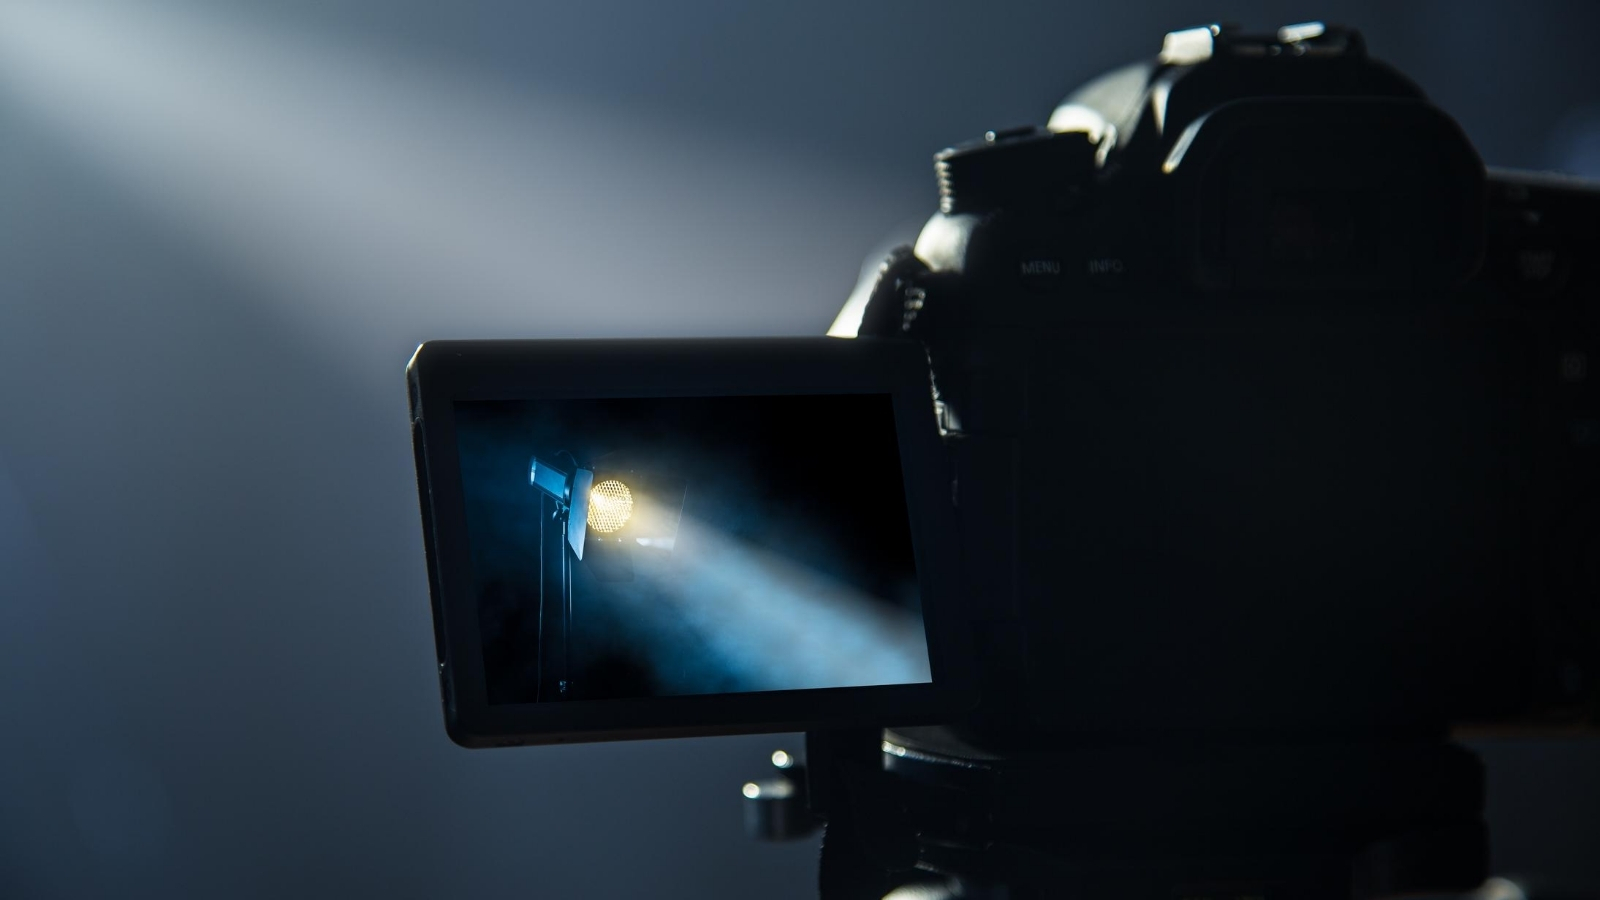 A close up, dramatic shot of a high quality film camera. On the camera's screen you can see a close up of a spotlight. The background is dark and misty